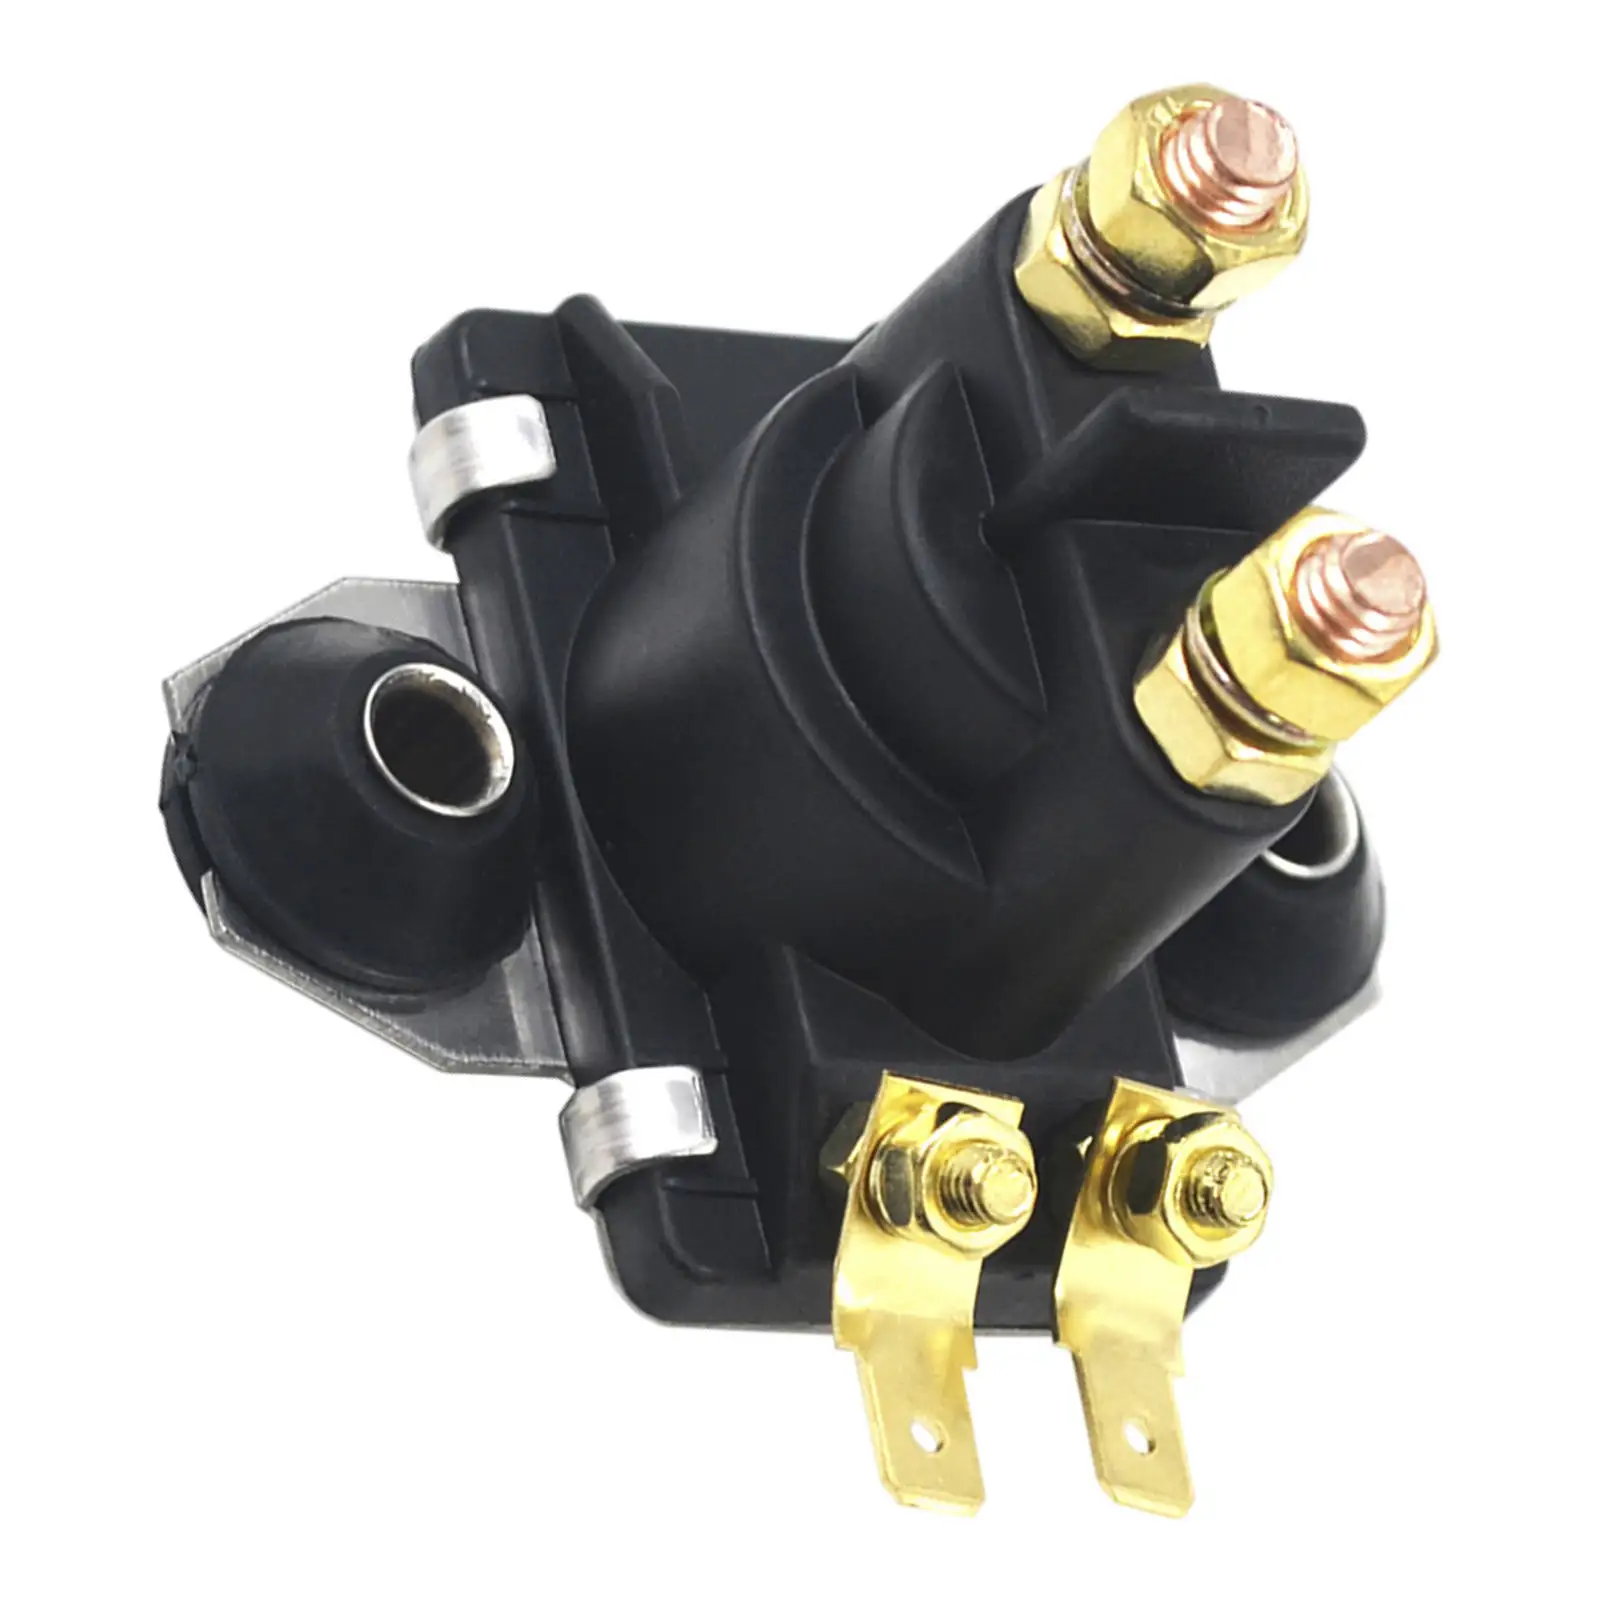 12V Motorcycle Starter Relay 65W-81941-00-00 Starter Solenoid Fit for 20HP 25HP 89-818998A2 89818997T1 89818997A1 89-818997T1